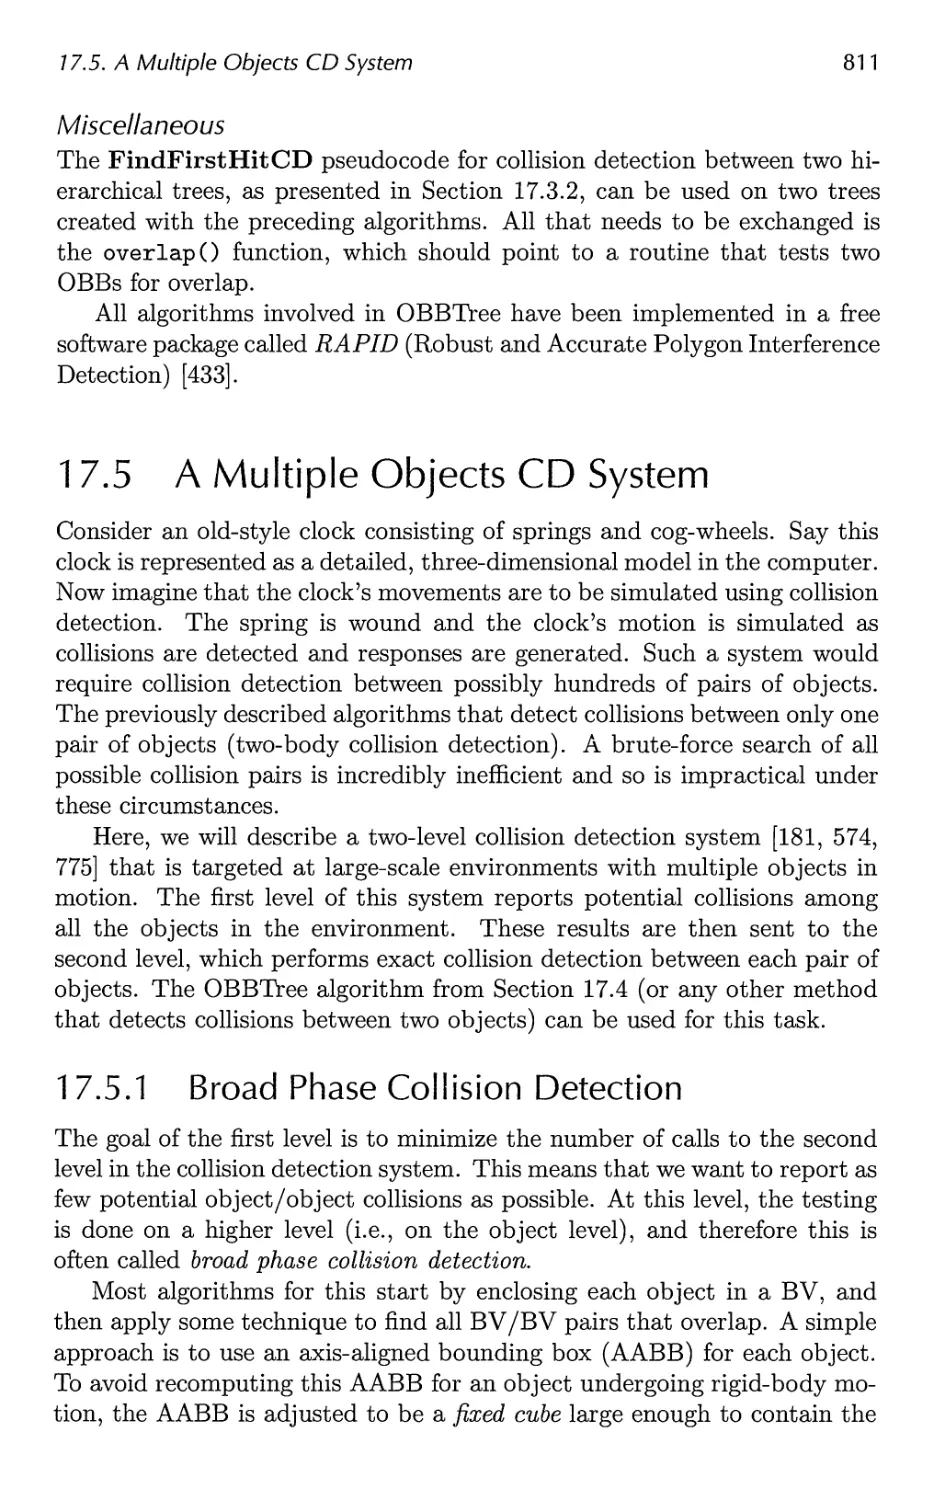 17.5 A Multiple Objects CD System